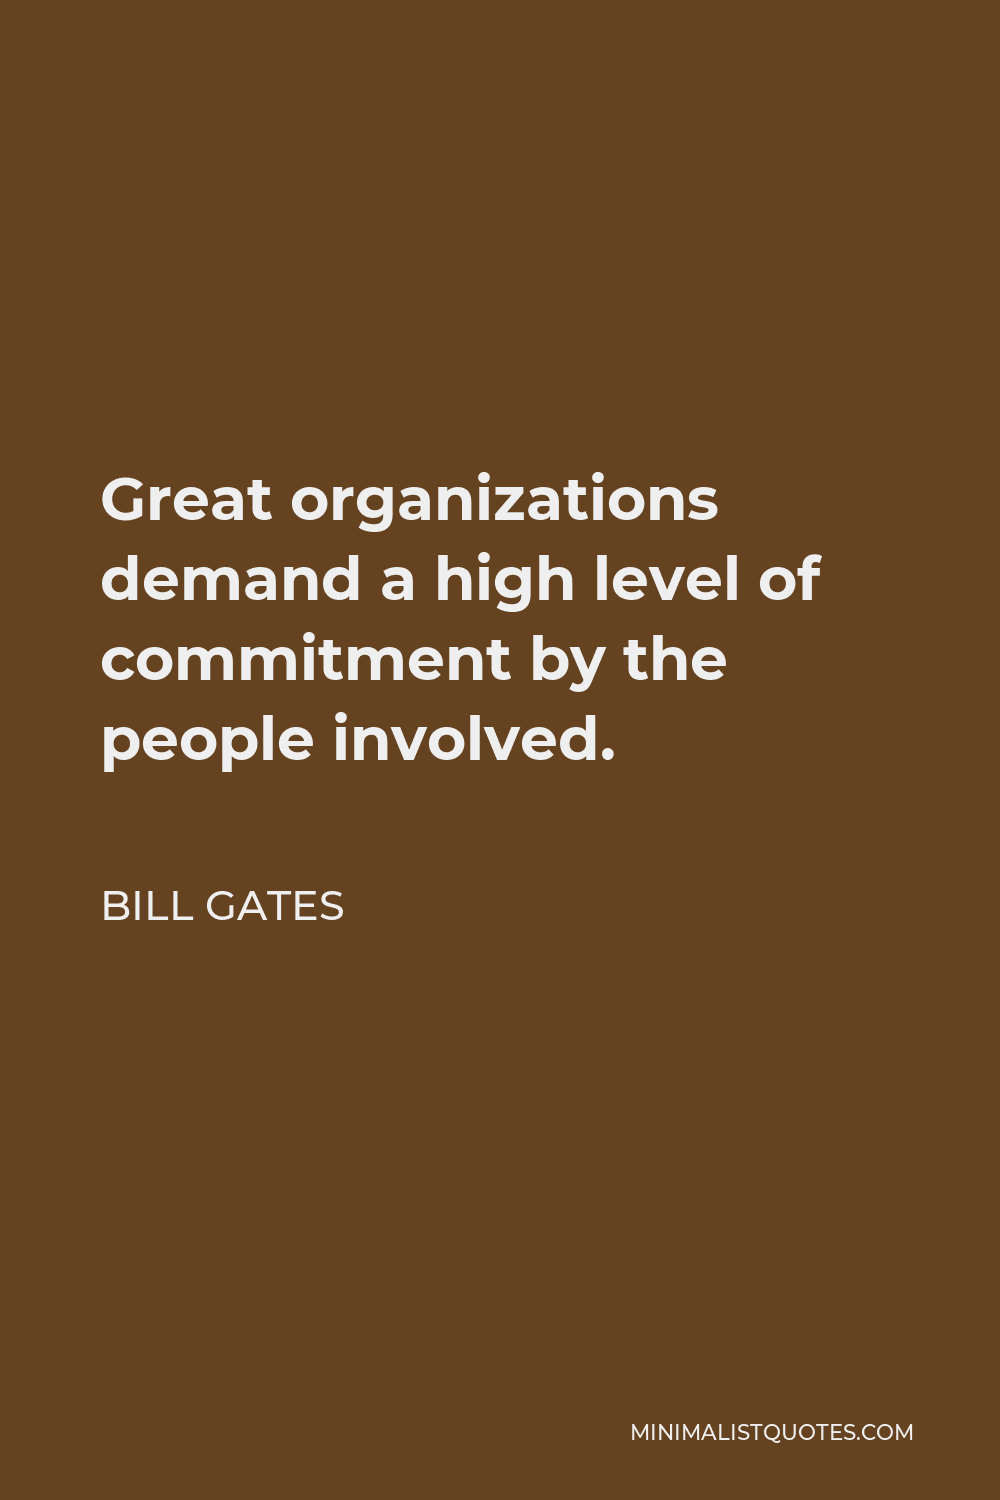 Bill Gates Quote - Great organizations demand a high level of commitment by the people involved.